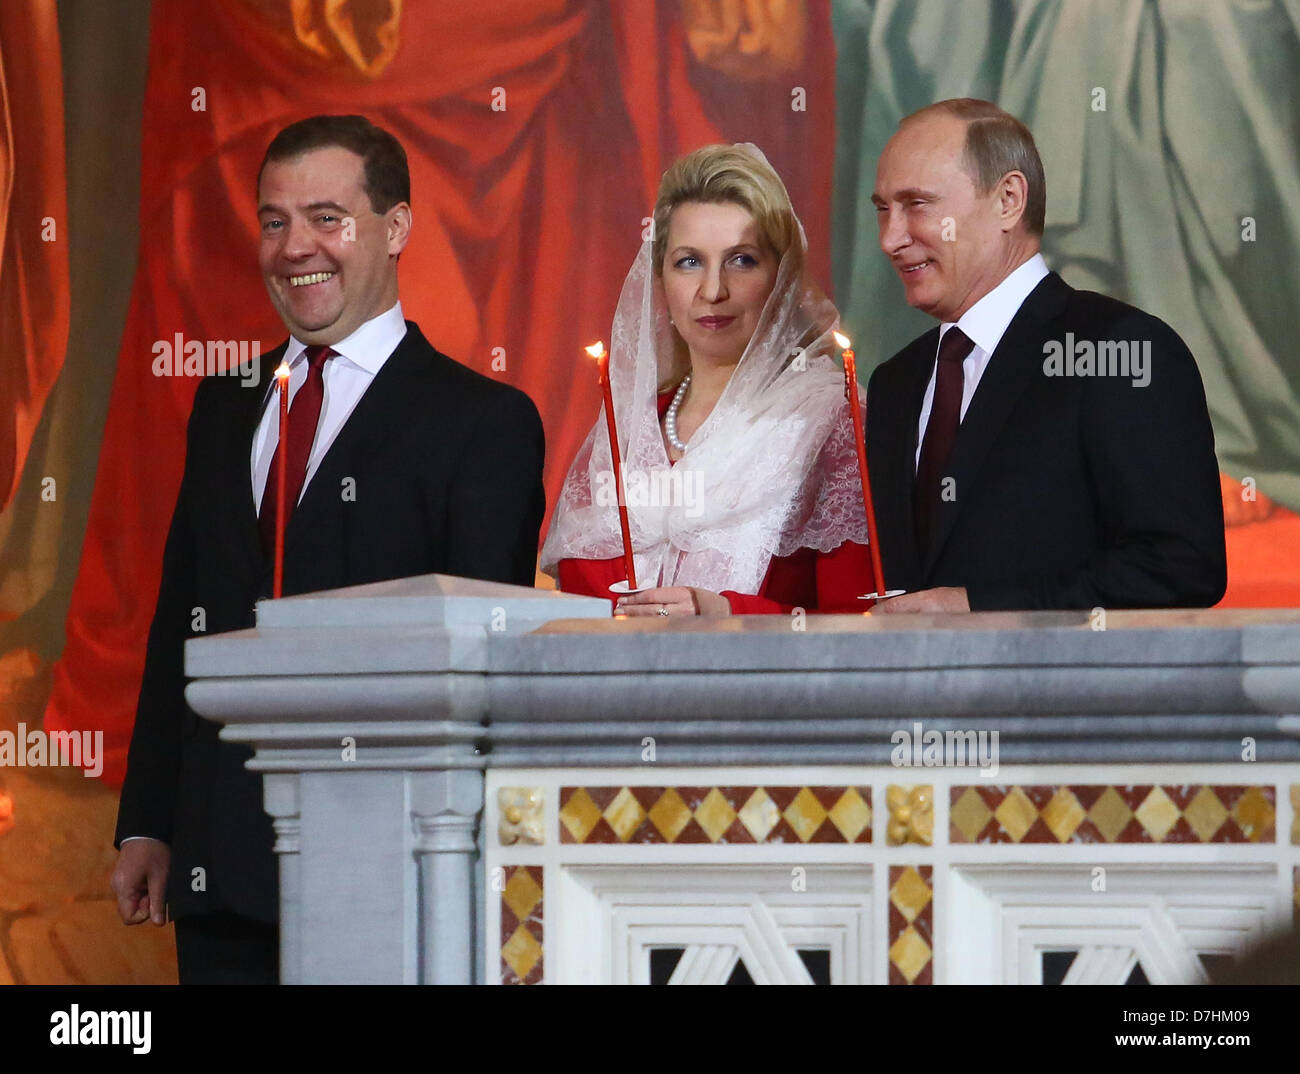 May 5, 2013 - Moscow, Russia - May 05,2013. Pictured: l-r Russia's Prime Minister Dmitry Medvedev, Medvedev's spouse Svetlana Medvedeva and Russia's President Vladimir Putin attend Orthodox Easter church service in the Christ the Savior Cathedral of Moscow. (Credit Image: © PhotoXpress/ZUMAPRESS.com) Stock Photo